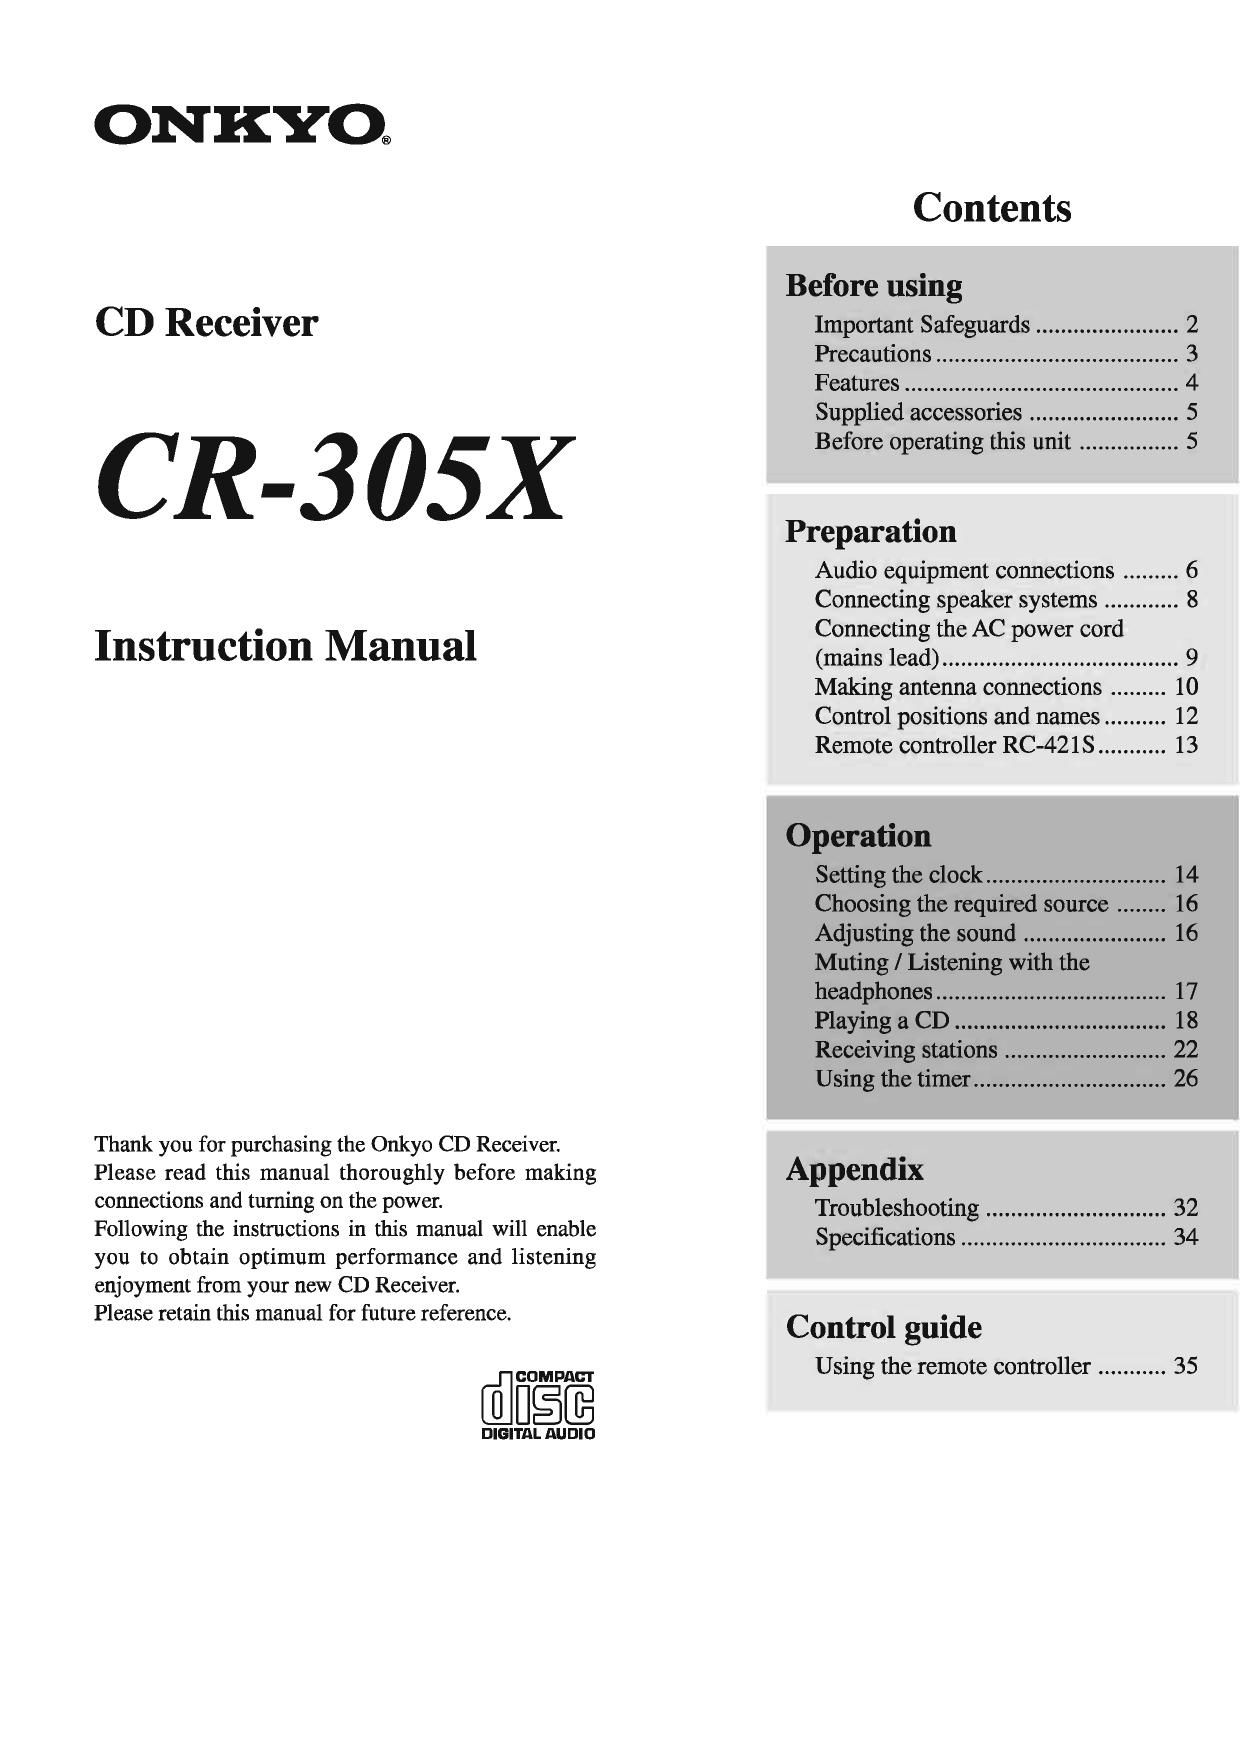 Onkyo CR 305 X Owners Manual